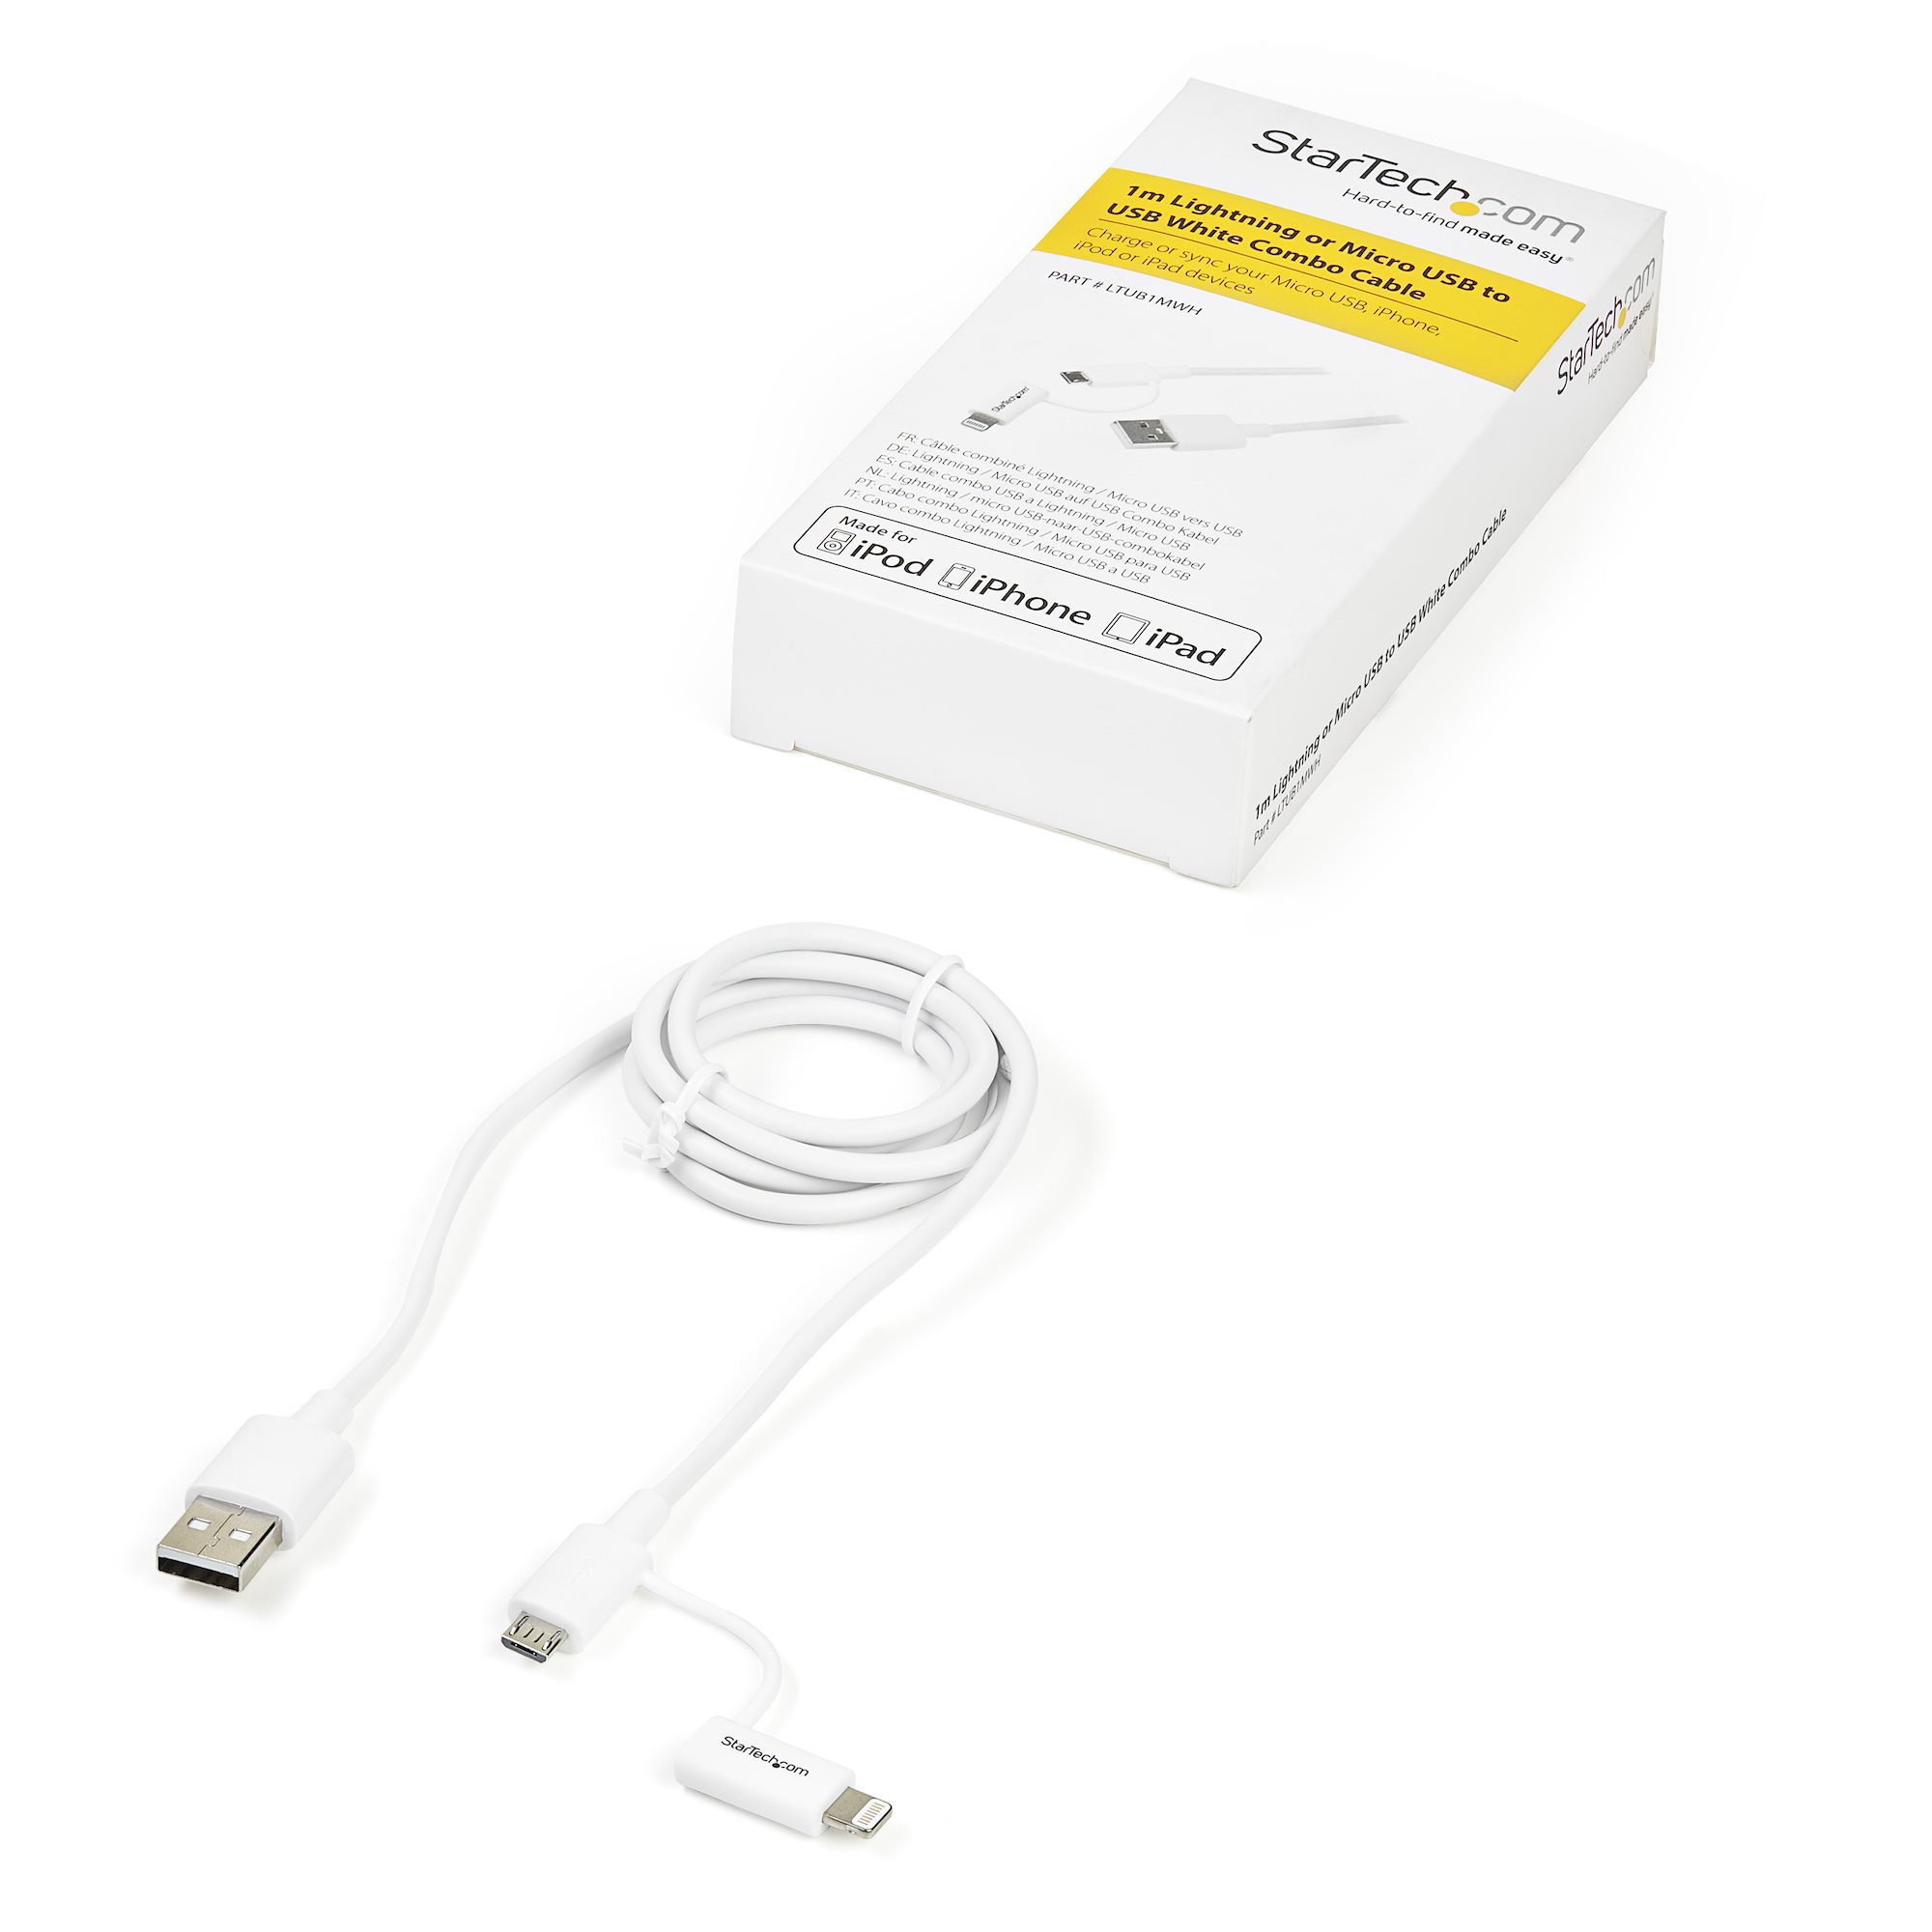 1m Lightning or Micro USB to USB Cable - Cables |